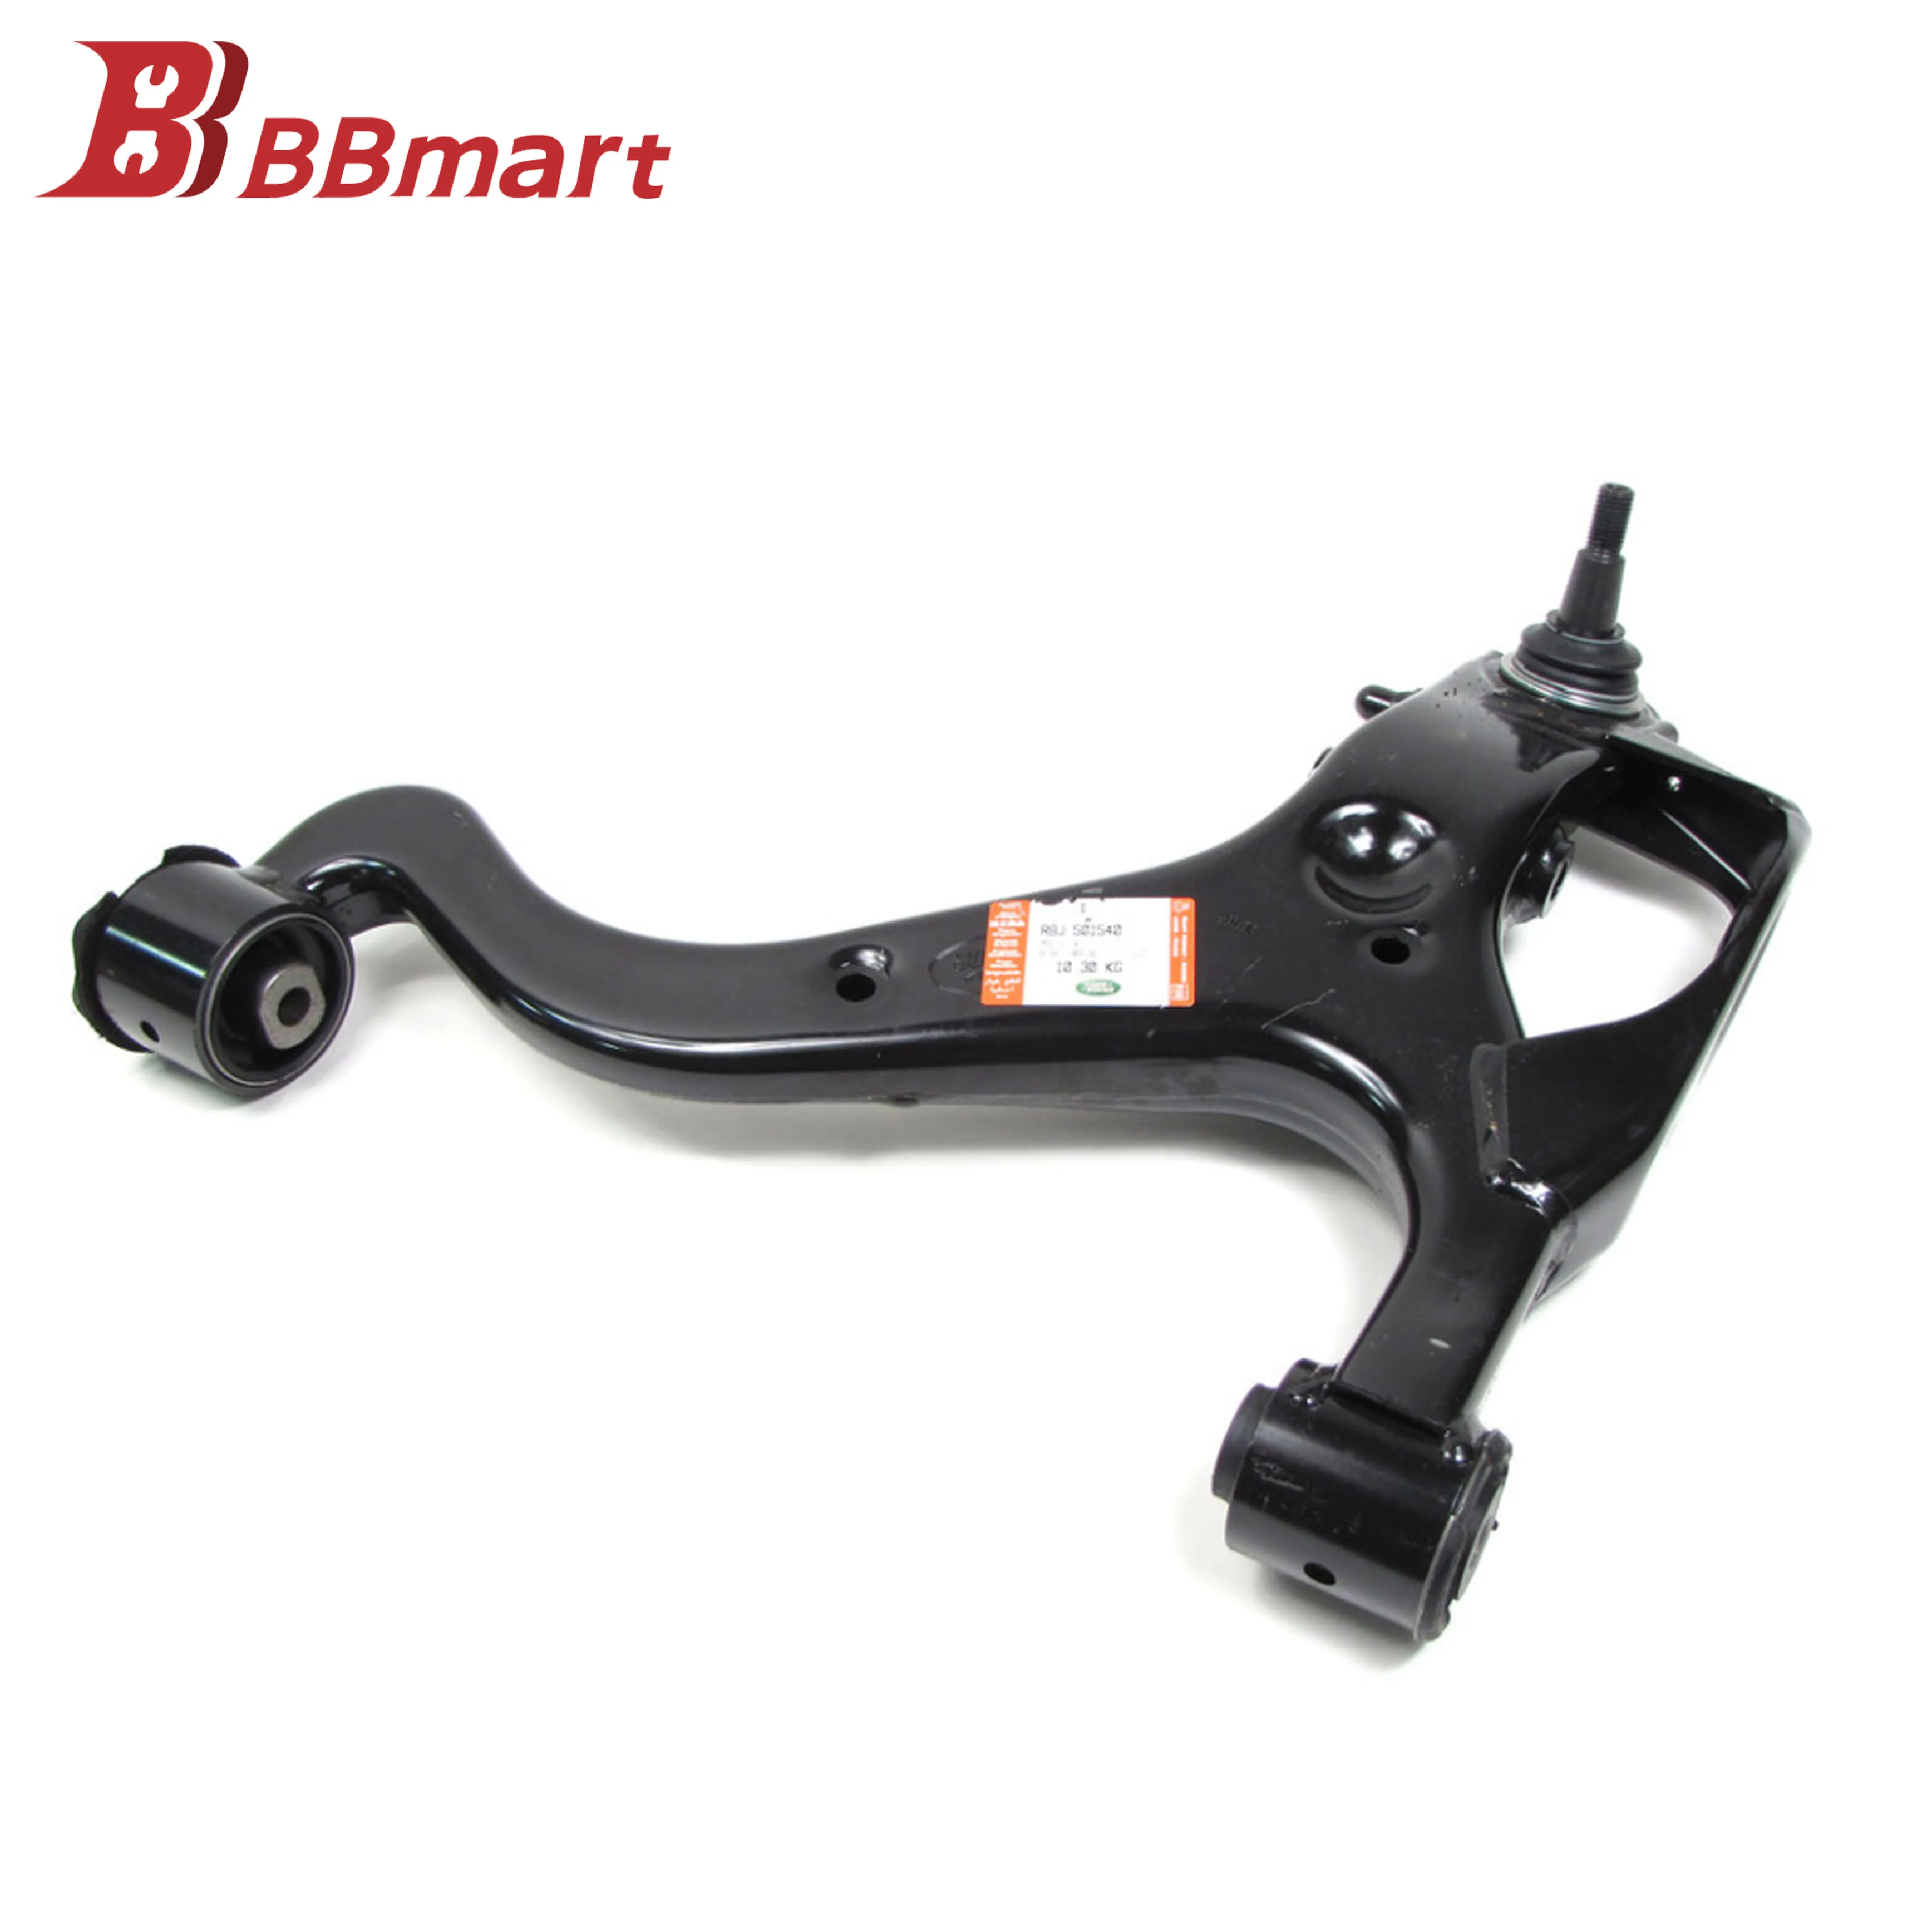 BBmart Auto Parts Front Lower Right Control Arm For Land Rover DISCOVERY 3 2005-2009 OE LR075993